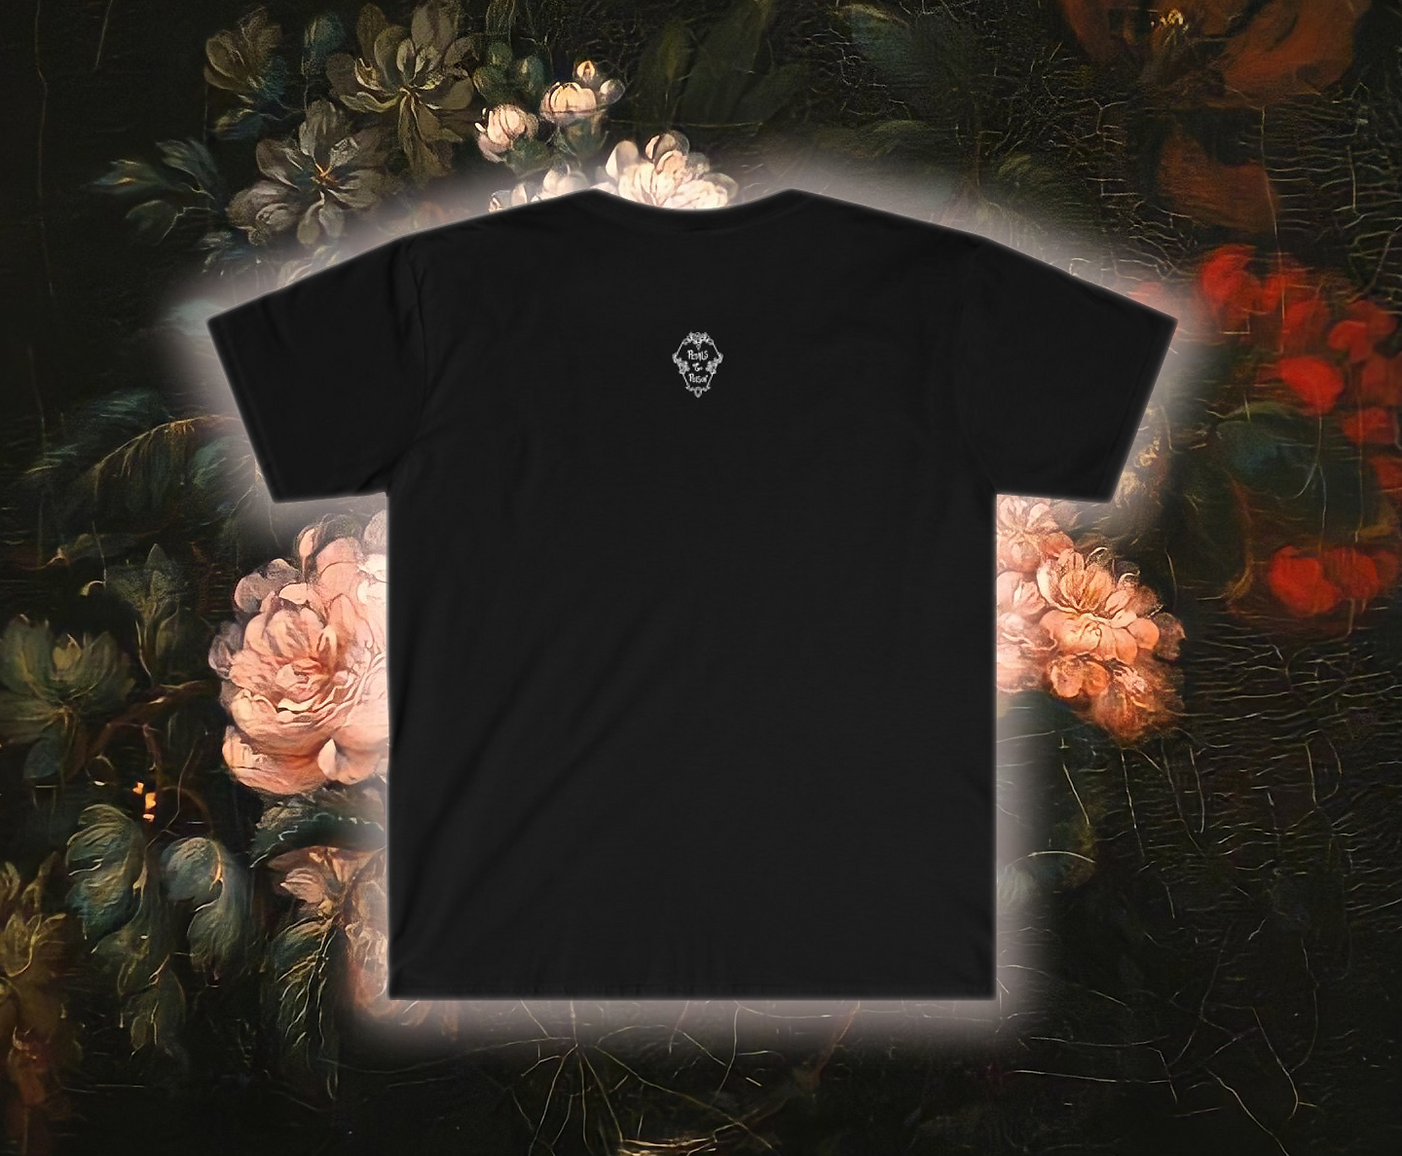 The "Spectral Society" Band Tee